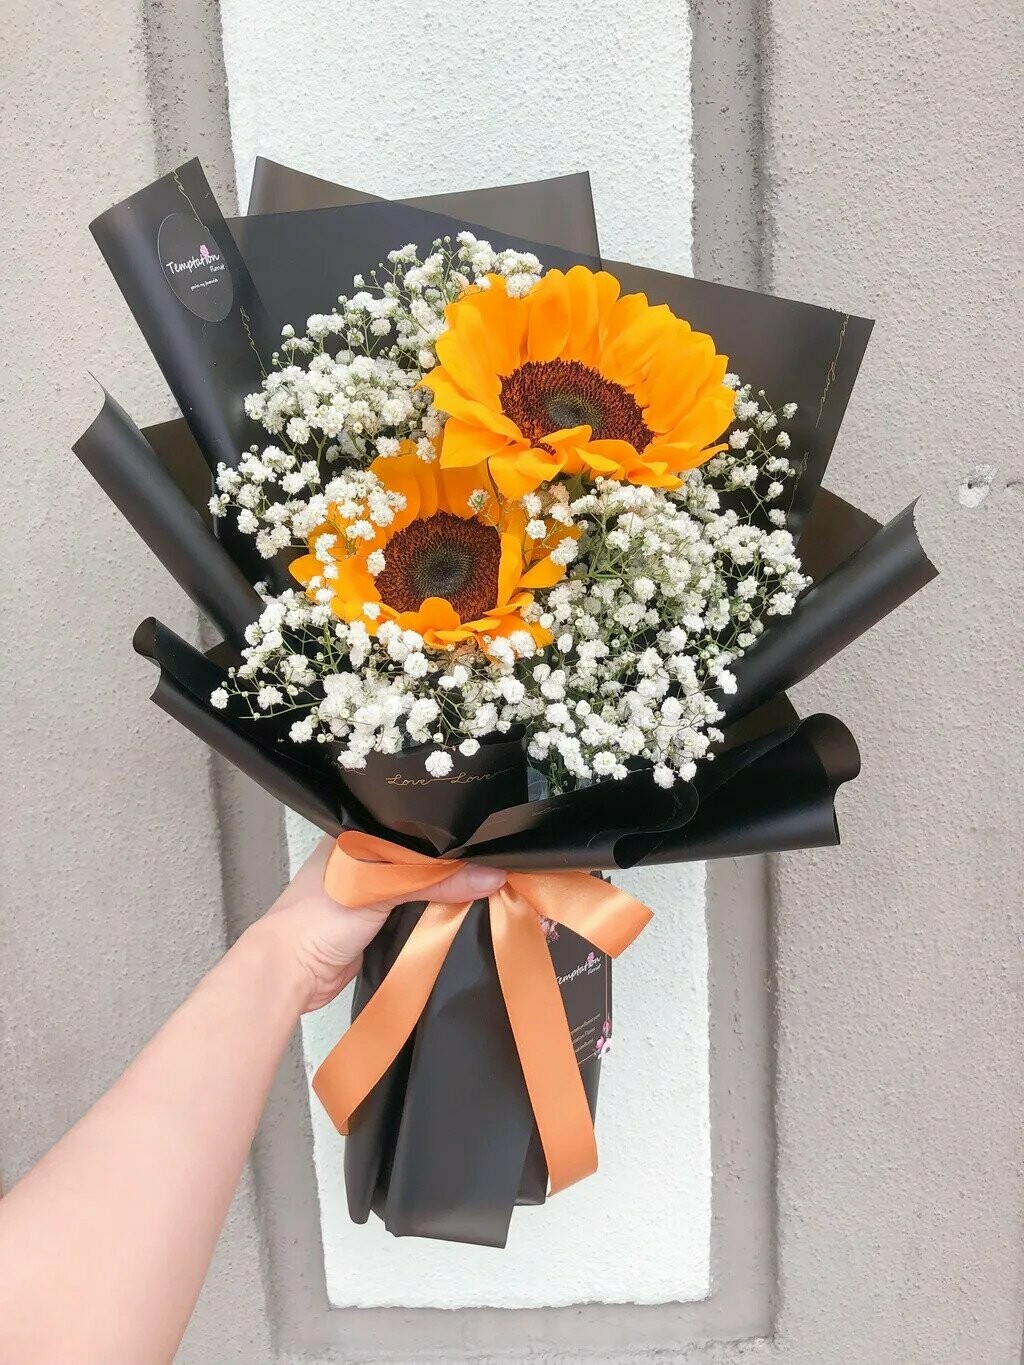 Shallow (By: Temptation Florist from Seremban)